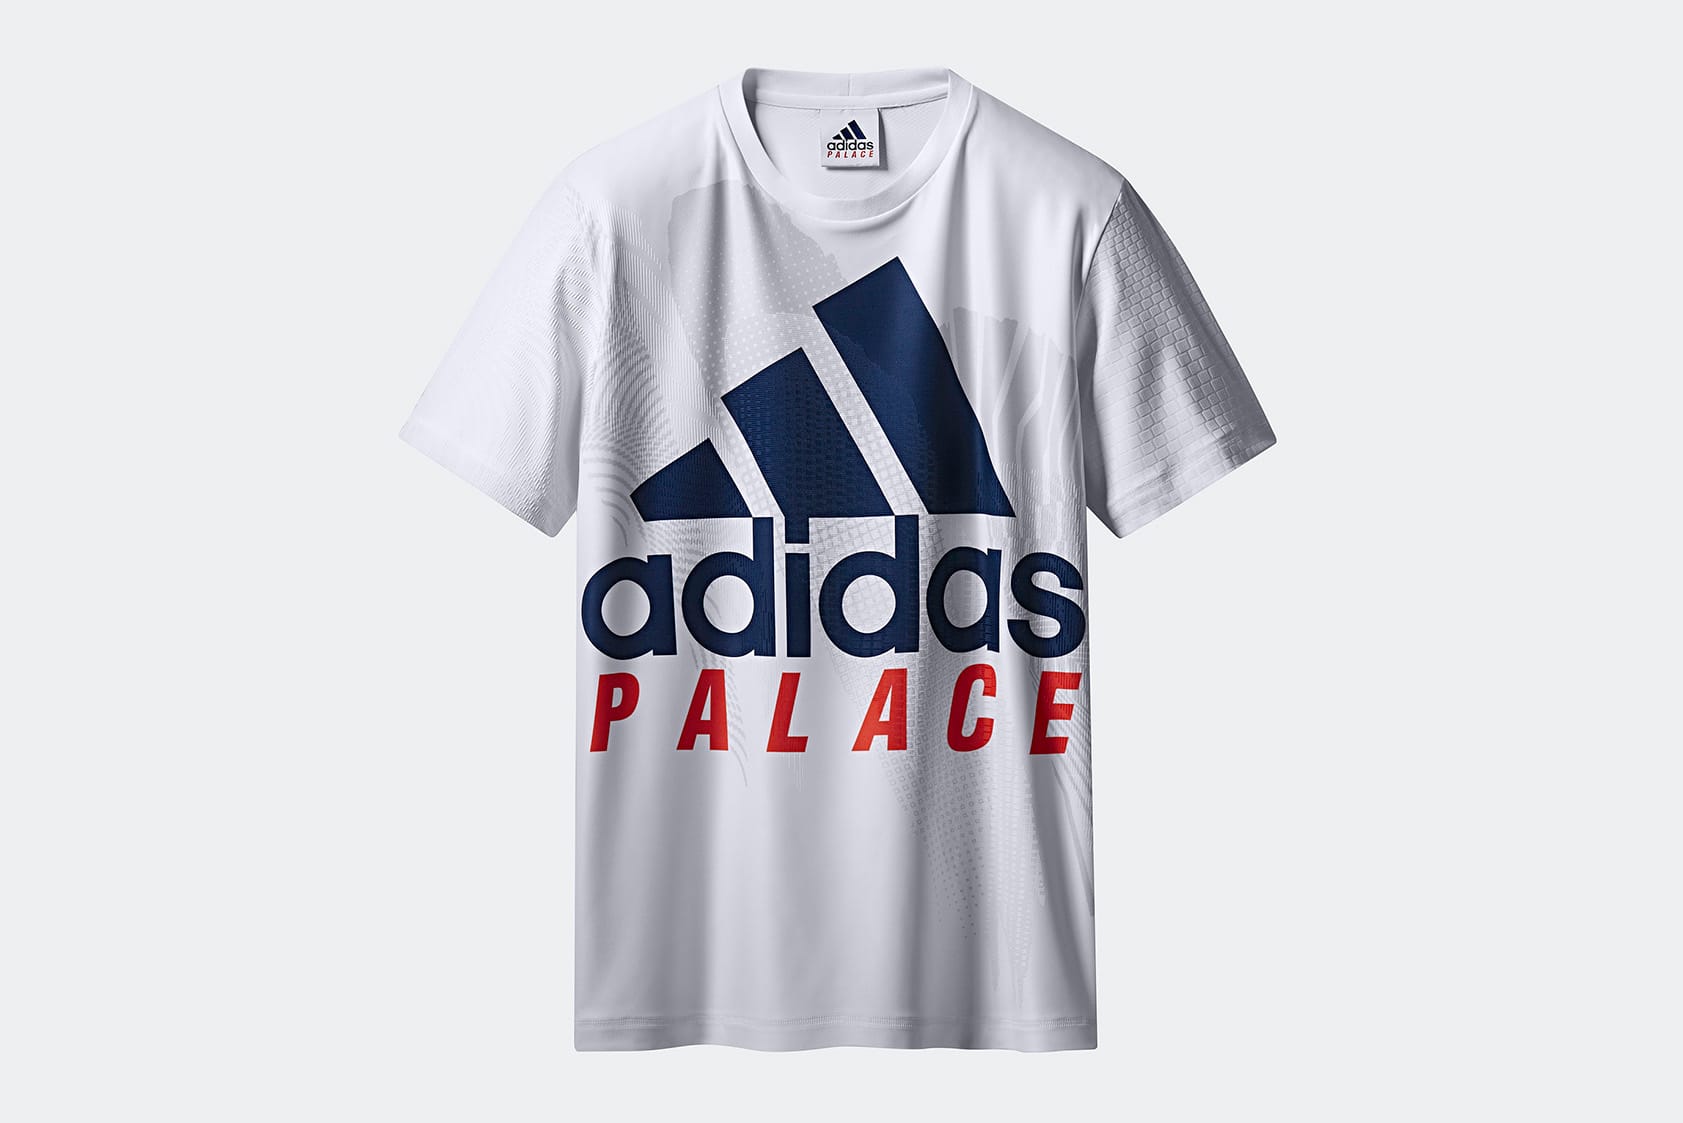 adidas palace collection